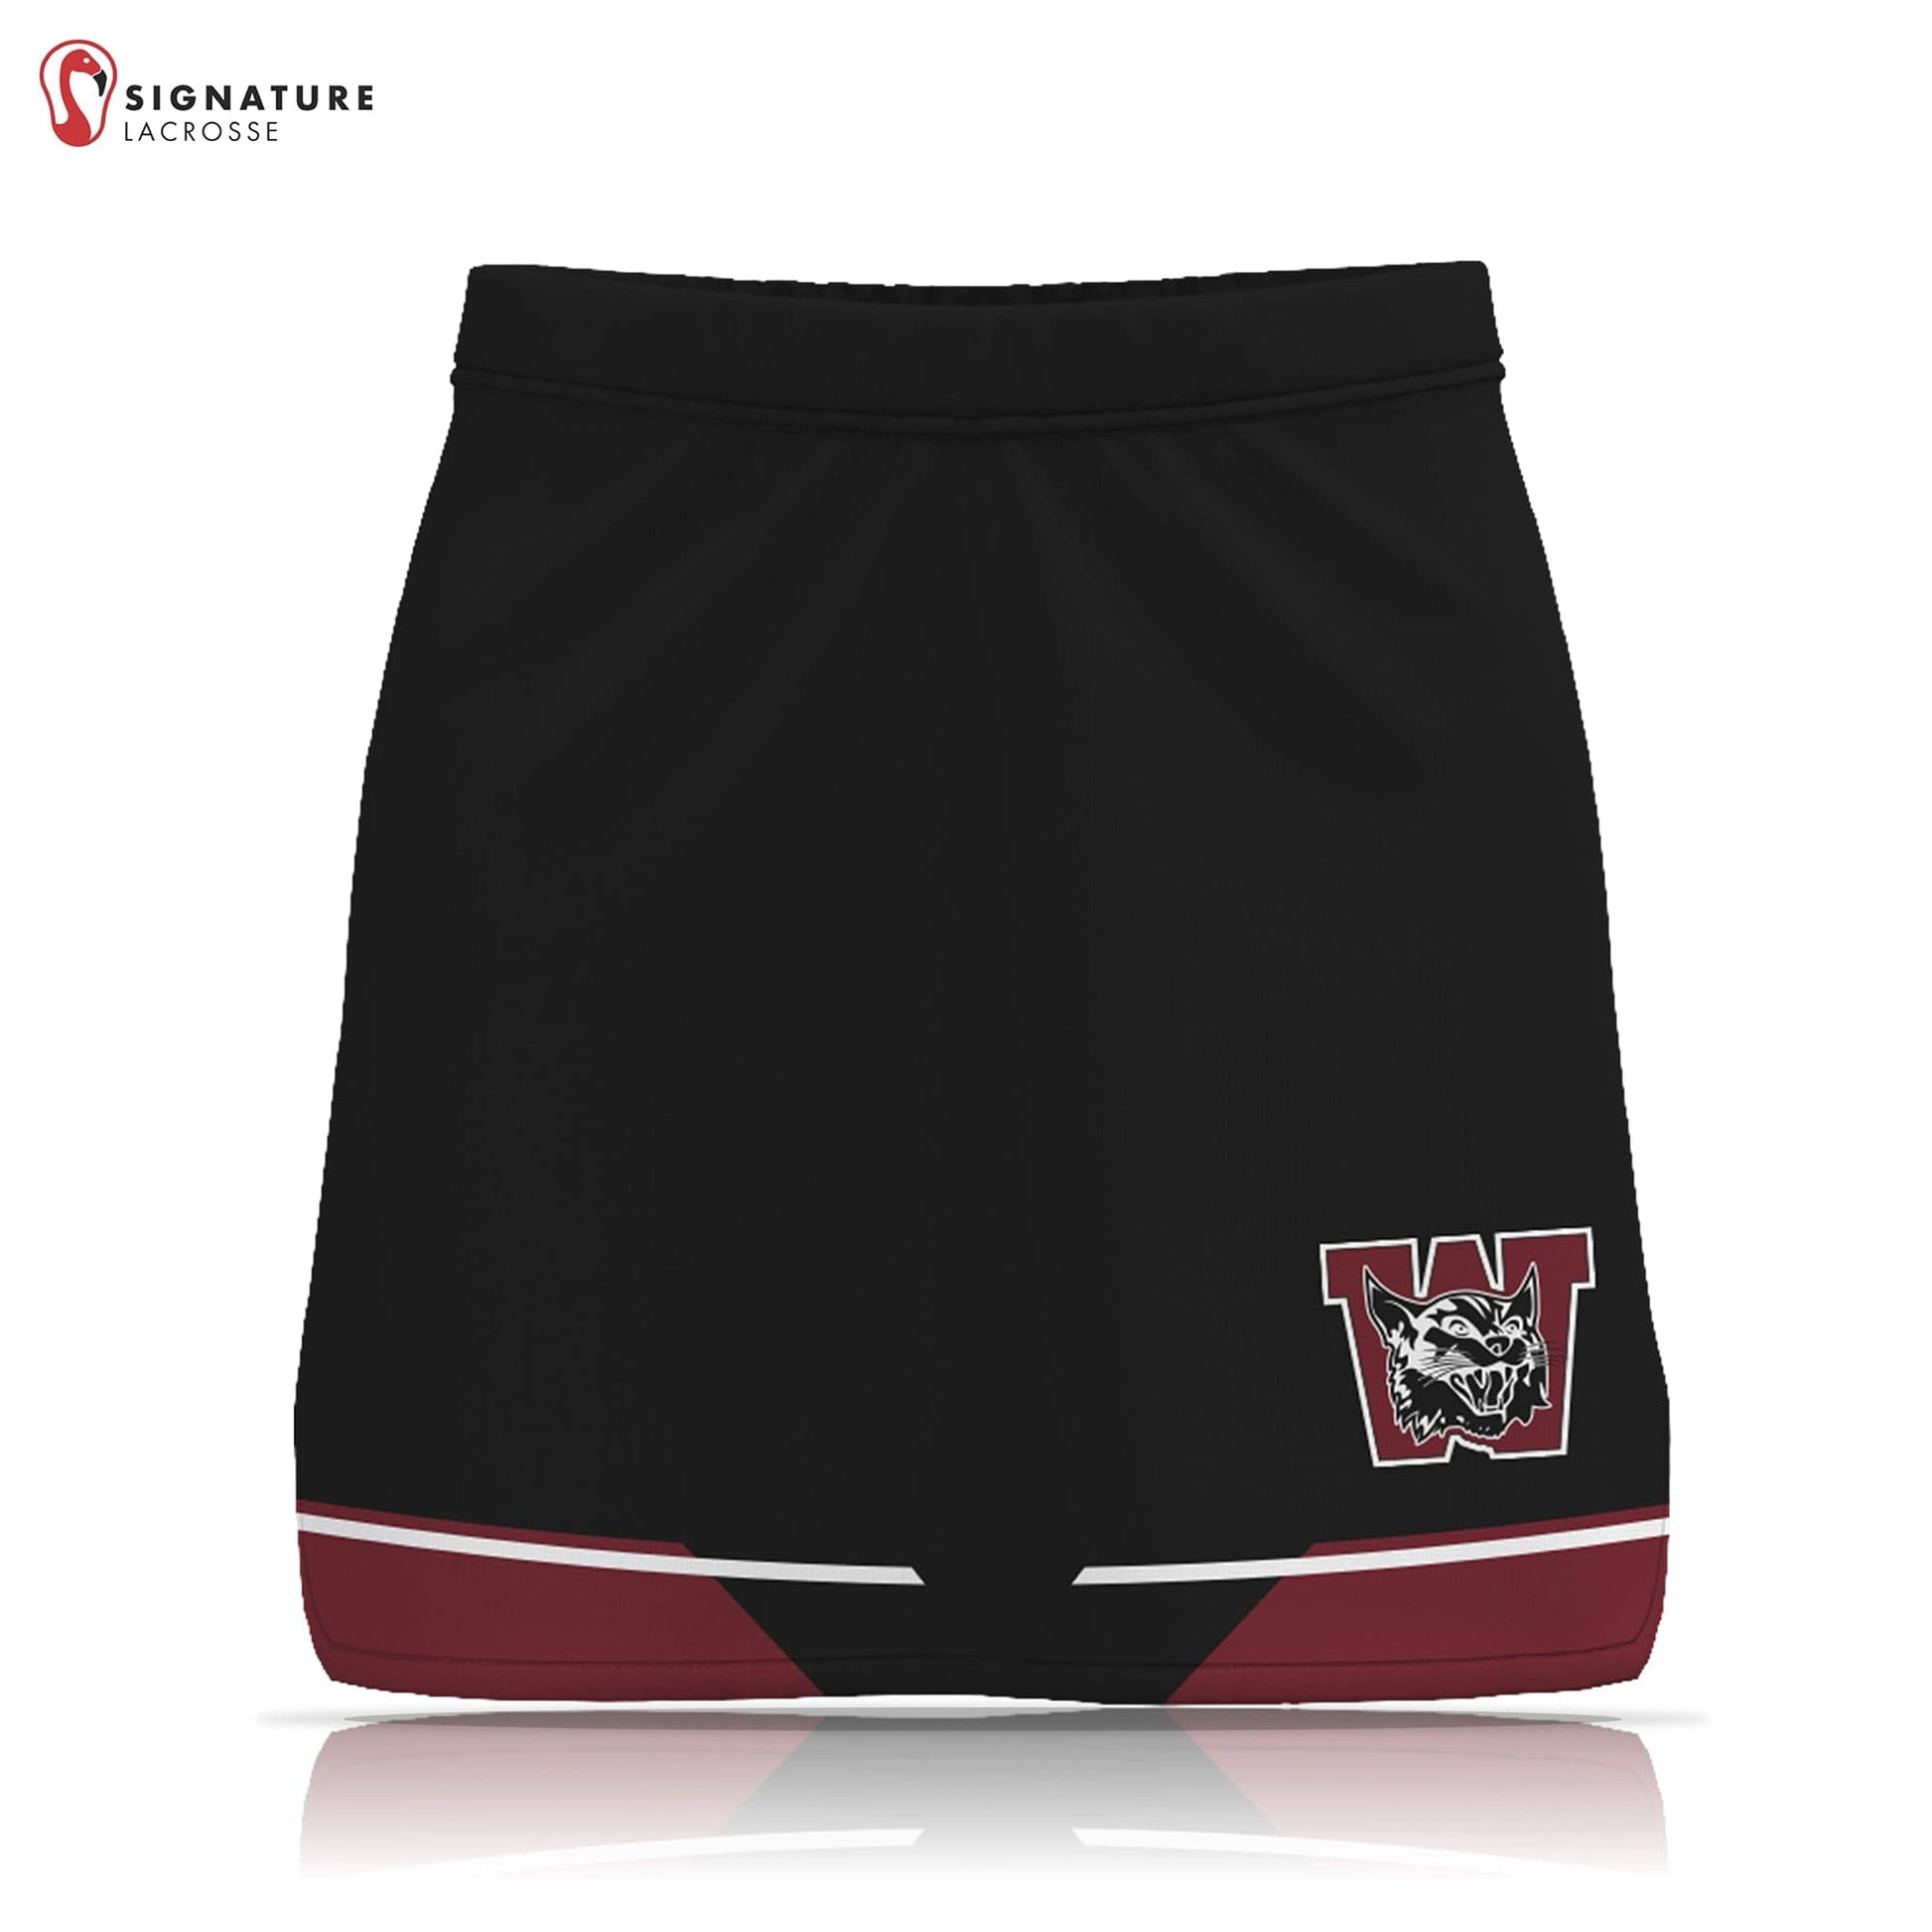 Weston Youth Lacrosse Women's Player Game Skirt: Grade 5-6 Signature Lacrosse